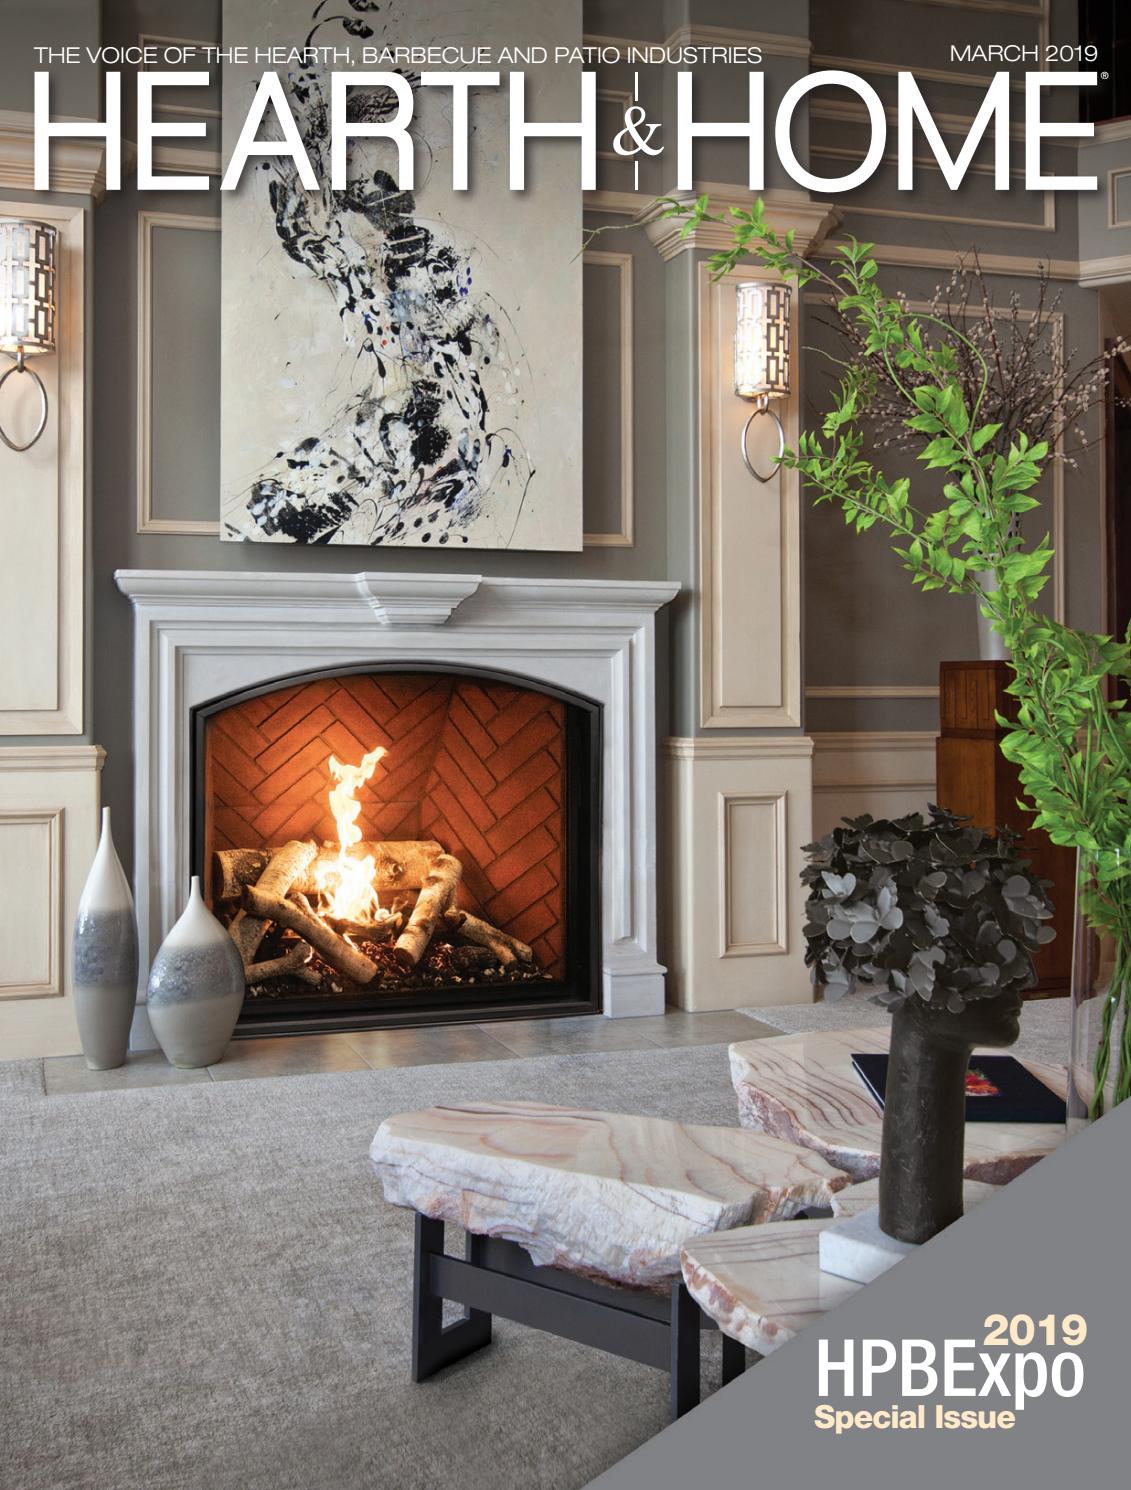 Fake Fireplaces that Look Real Best Of Hearth & Home Magazine – 2019 March issue by Hearth & Home